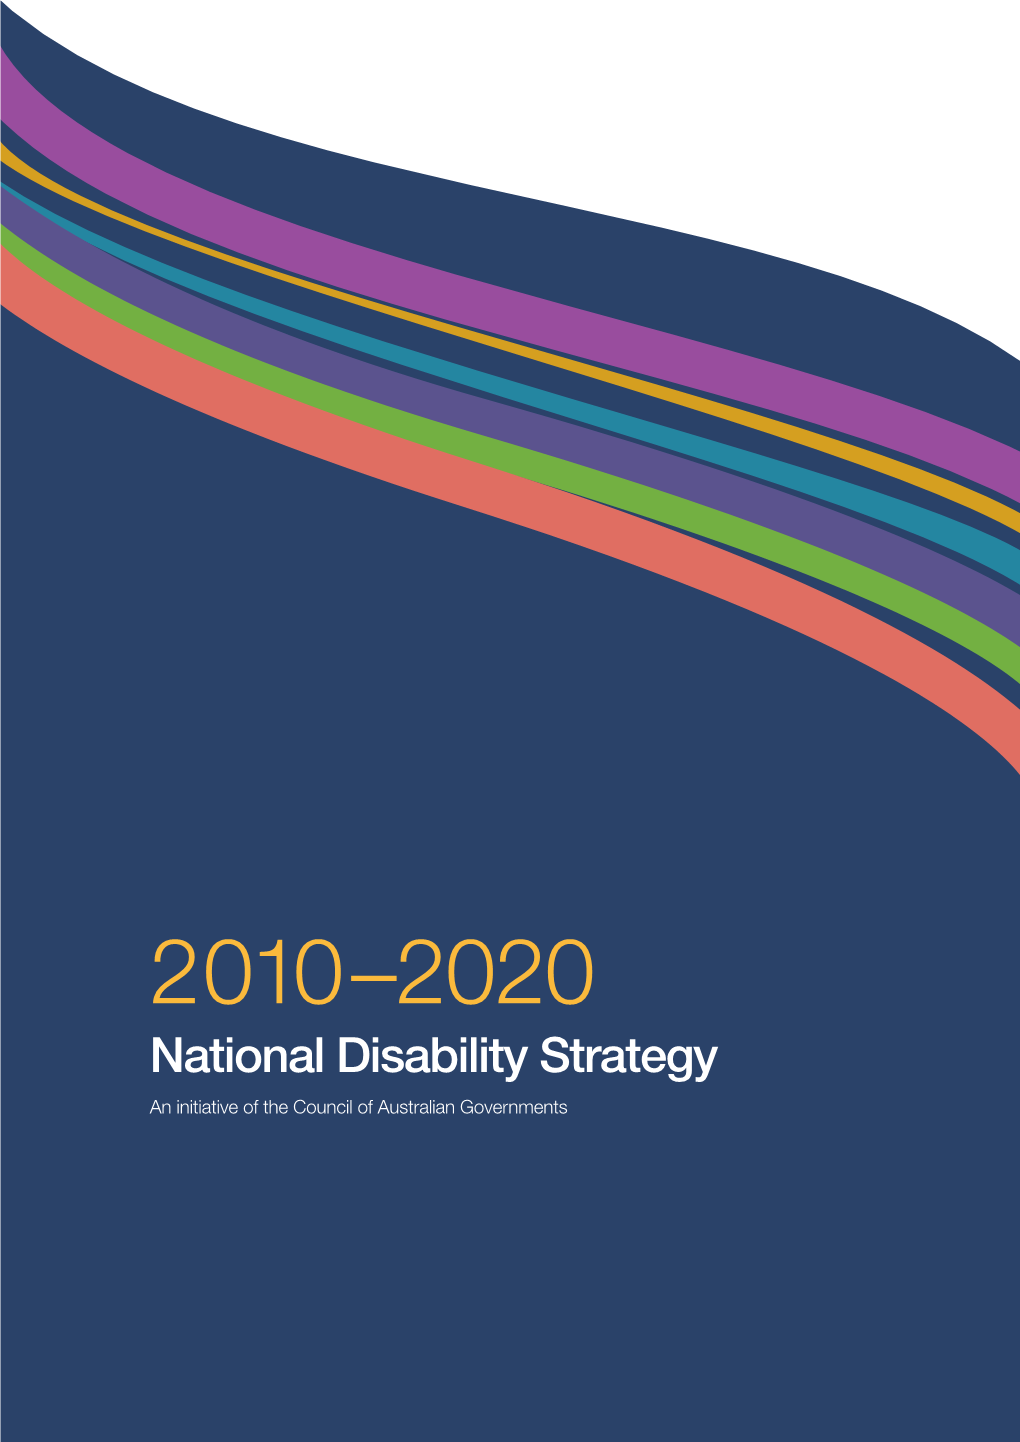 National Disability Strategy 2010-2020